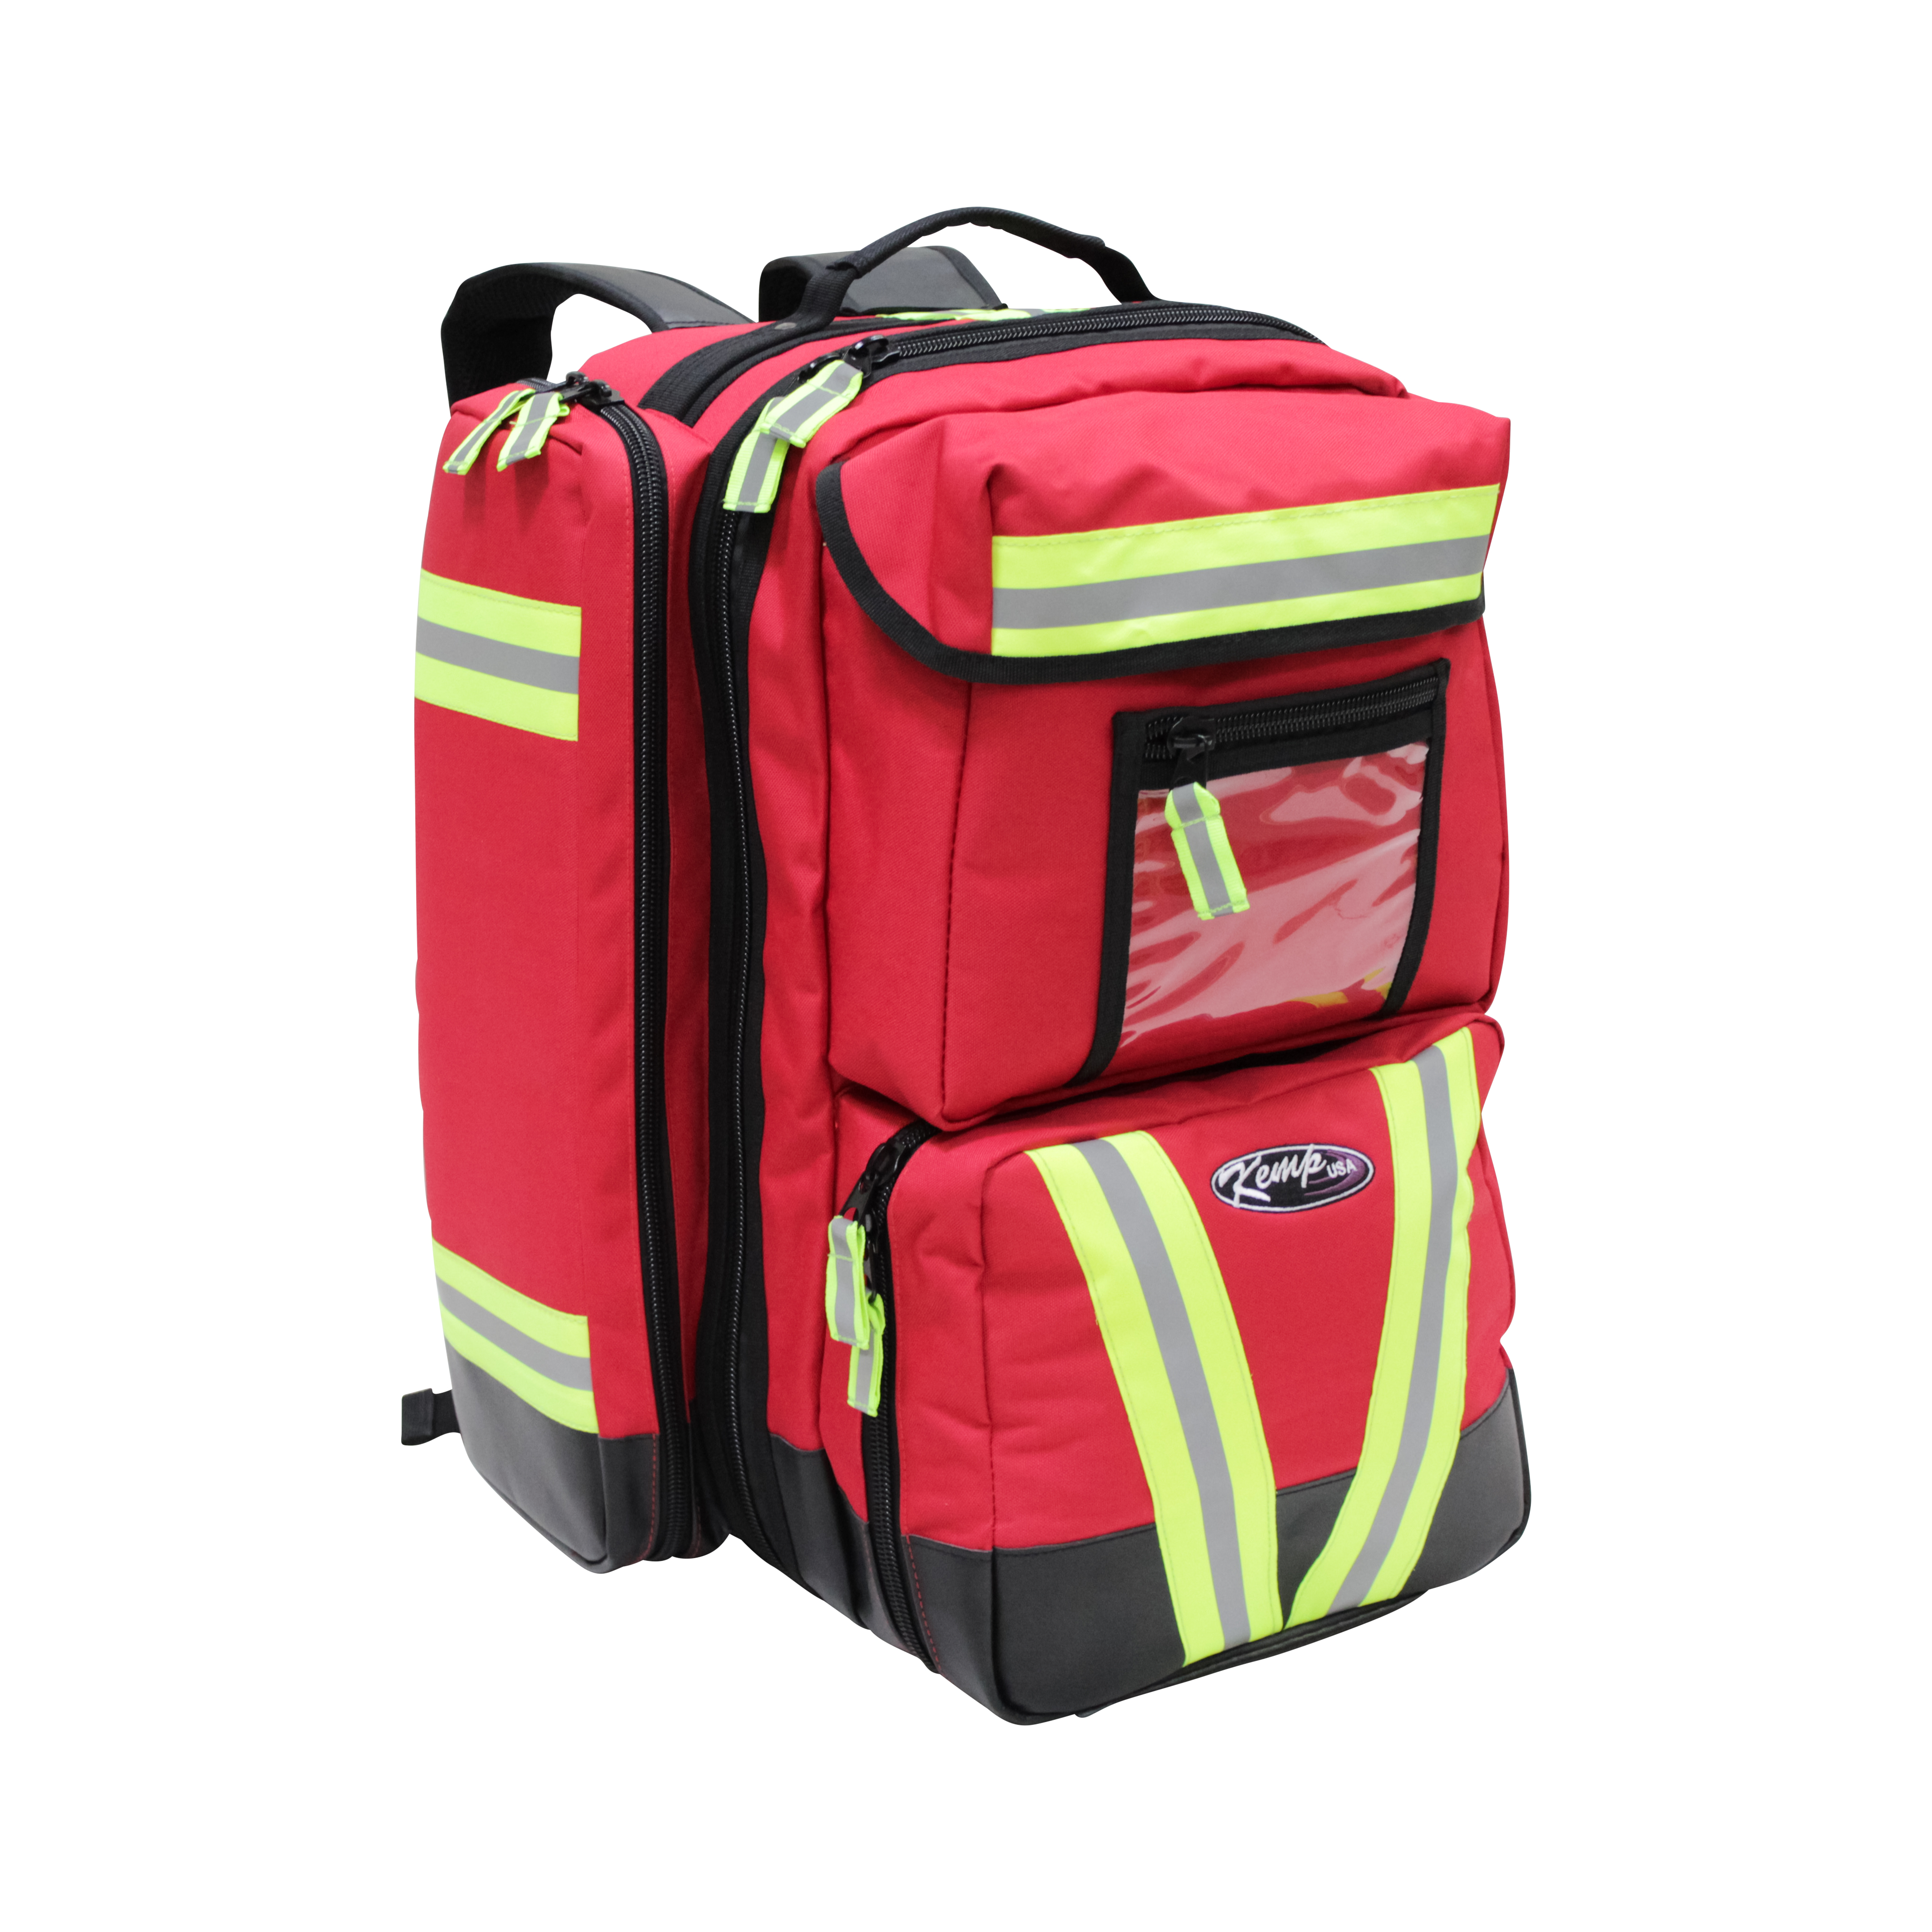 KEMP 10-115 Ultimate Ems Backpack Red